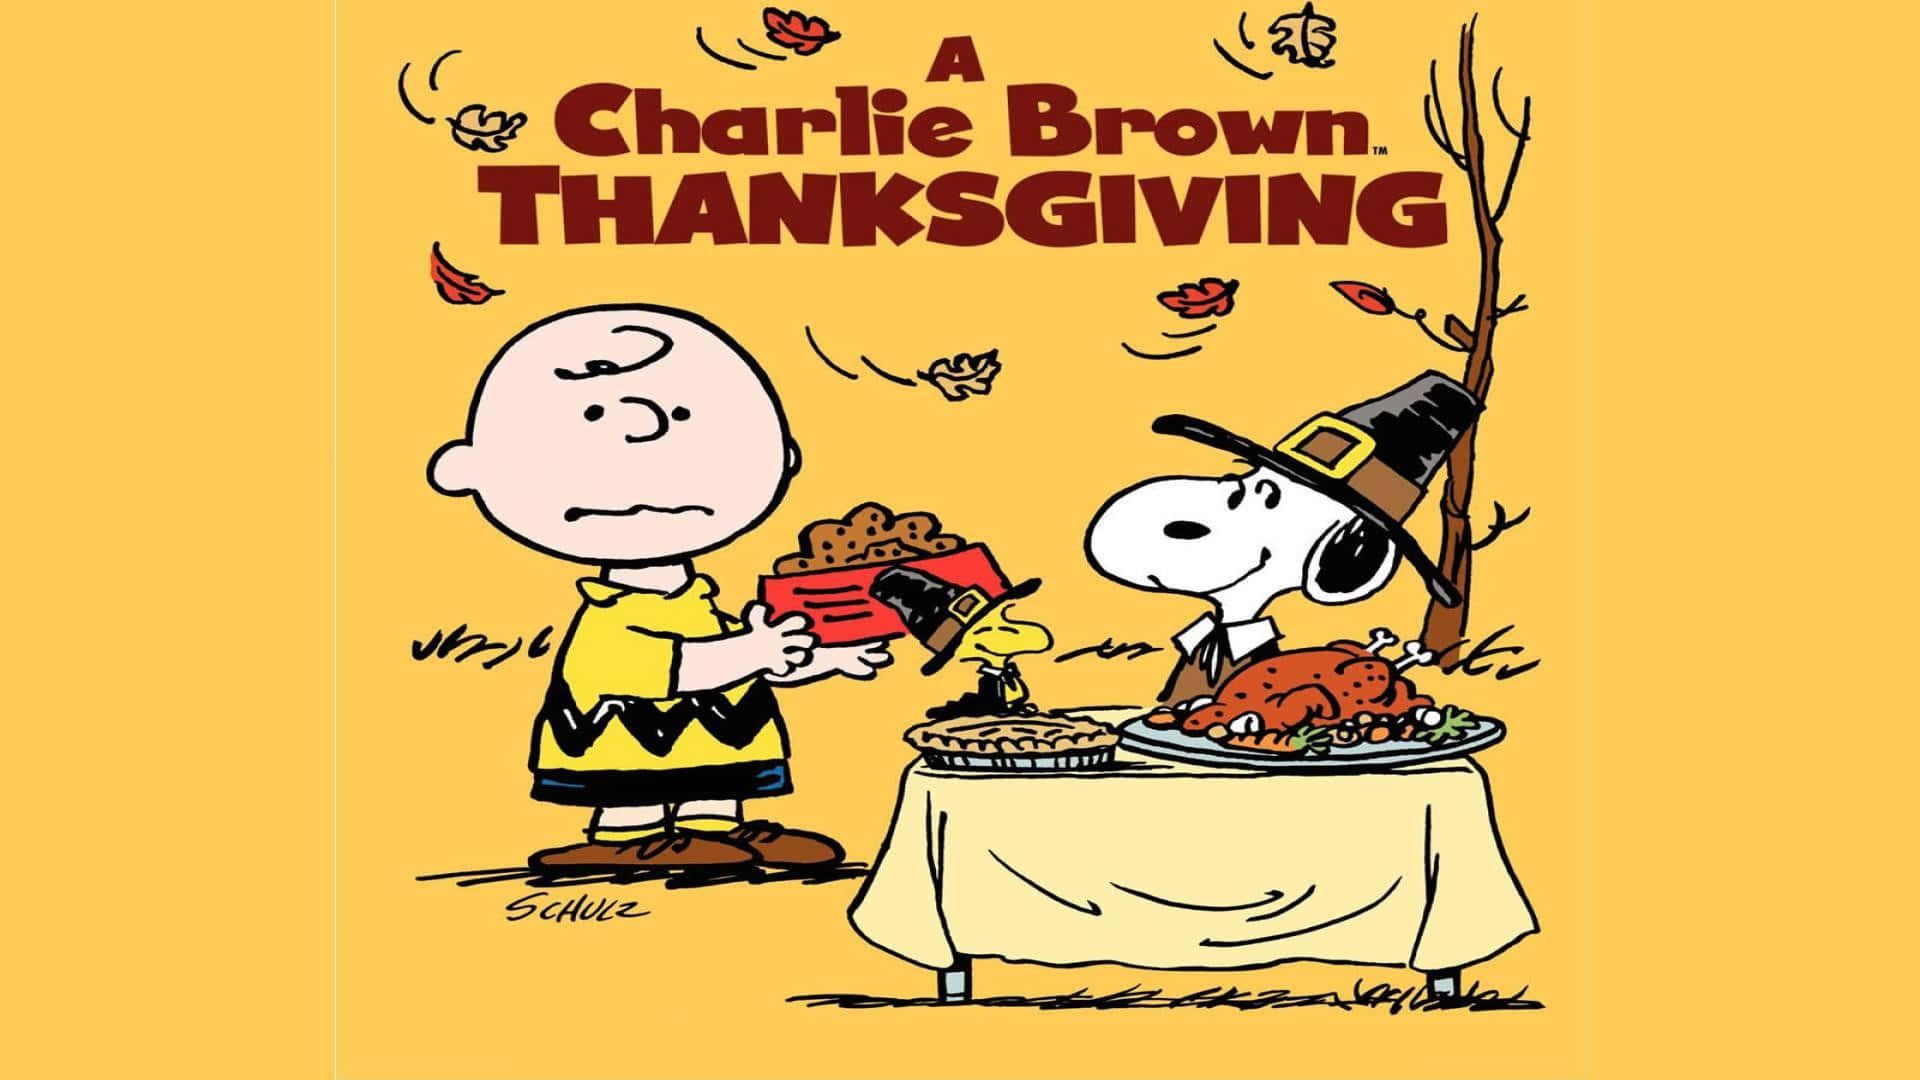 A Thankful Snoopy Celebrates Thanksgiving Background